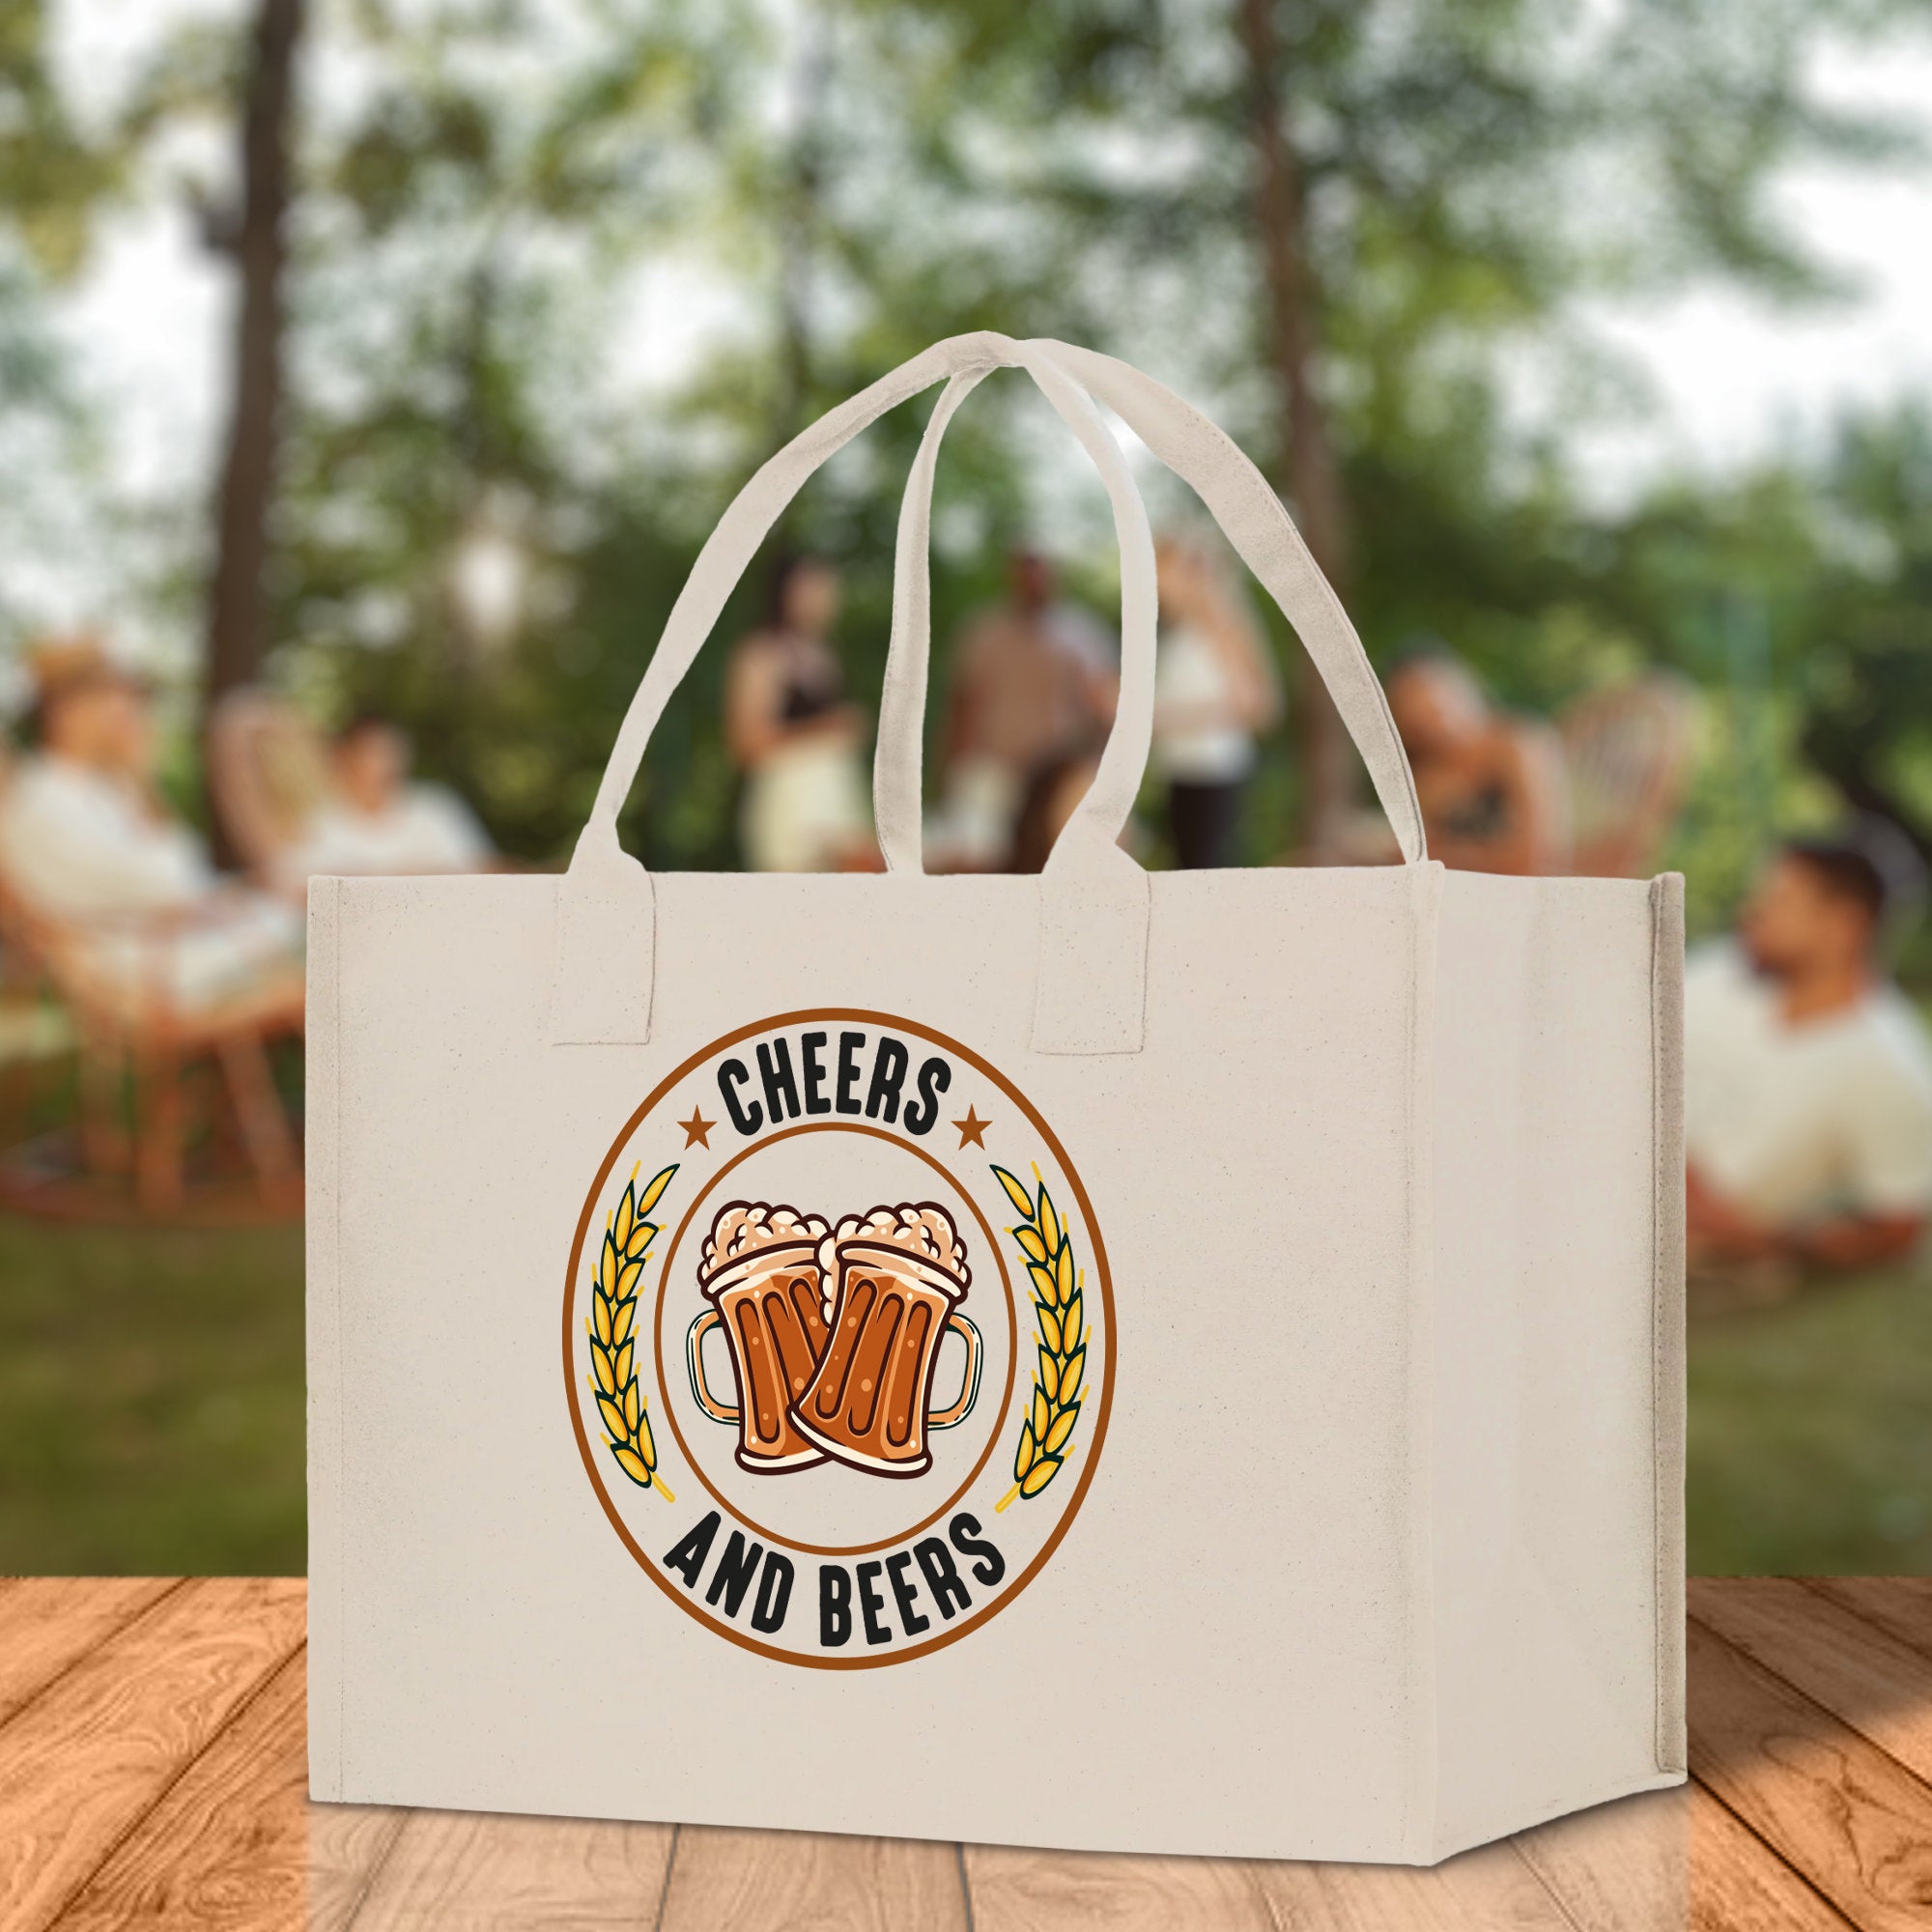 Cheers And Beers Cotton Canvas Tote Bag for German Octoberfest Beer Festival Party Bag Beer Lovers Gift Bag